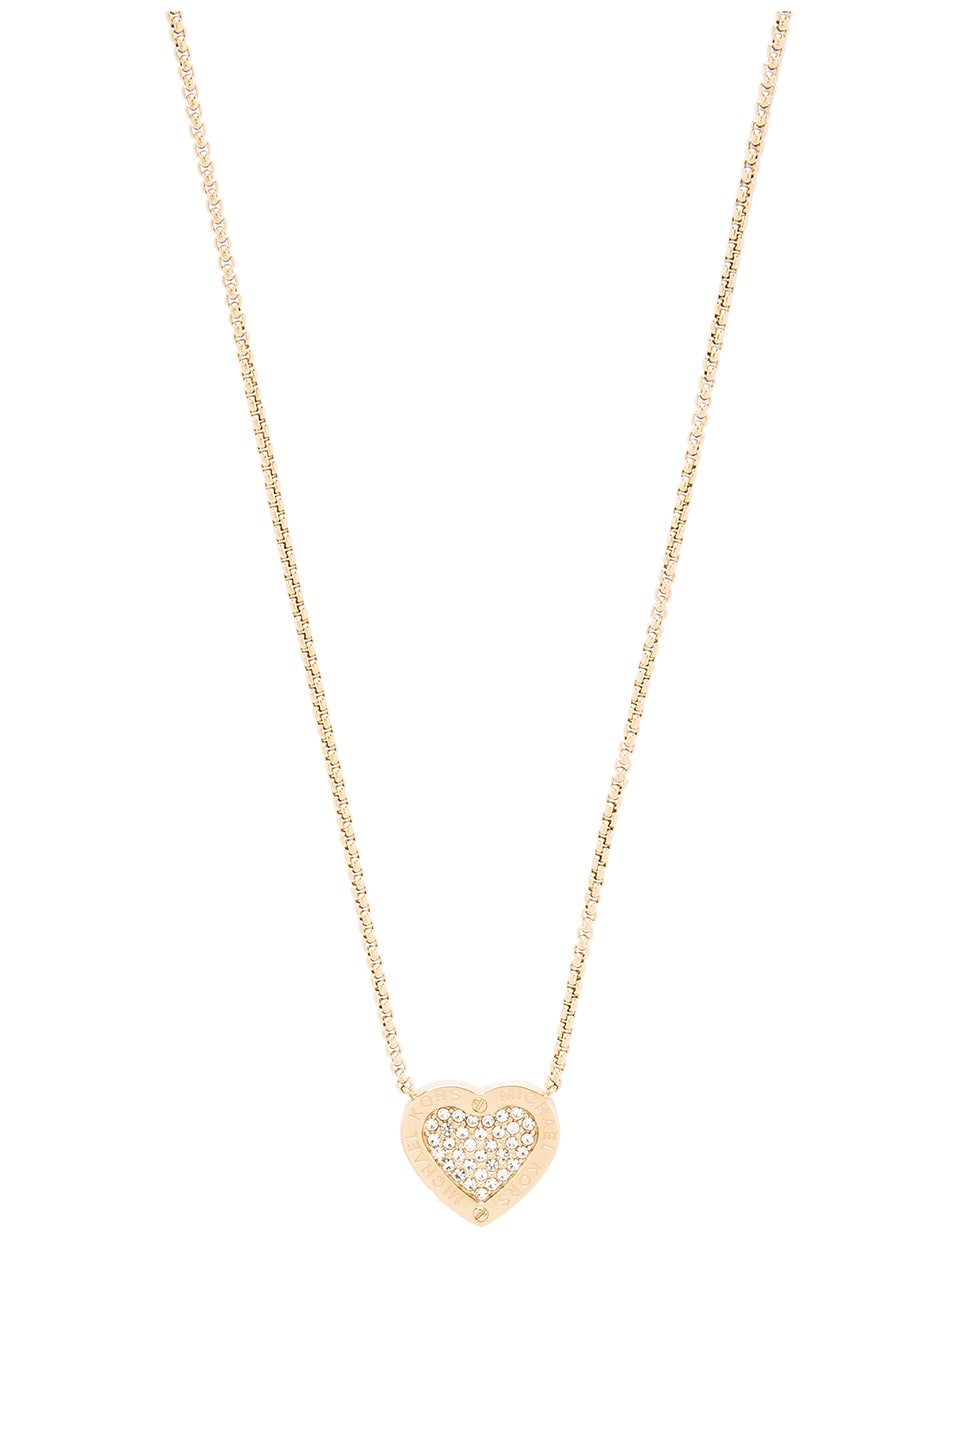 Michael Kors Necklaces Jewelry Sale and Clearance Jewelry Items - Macy's